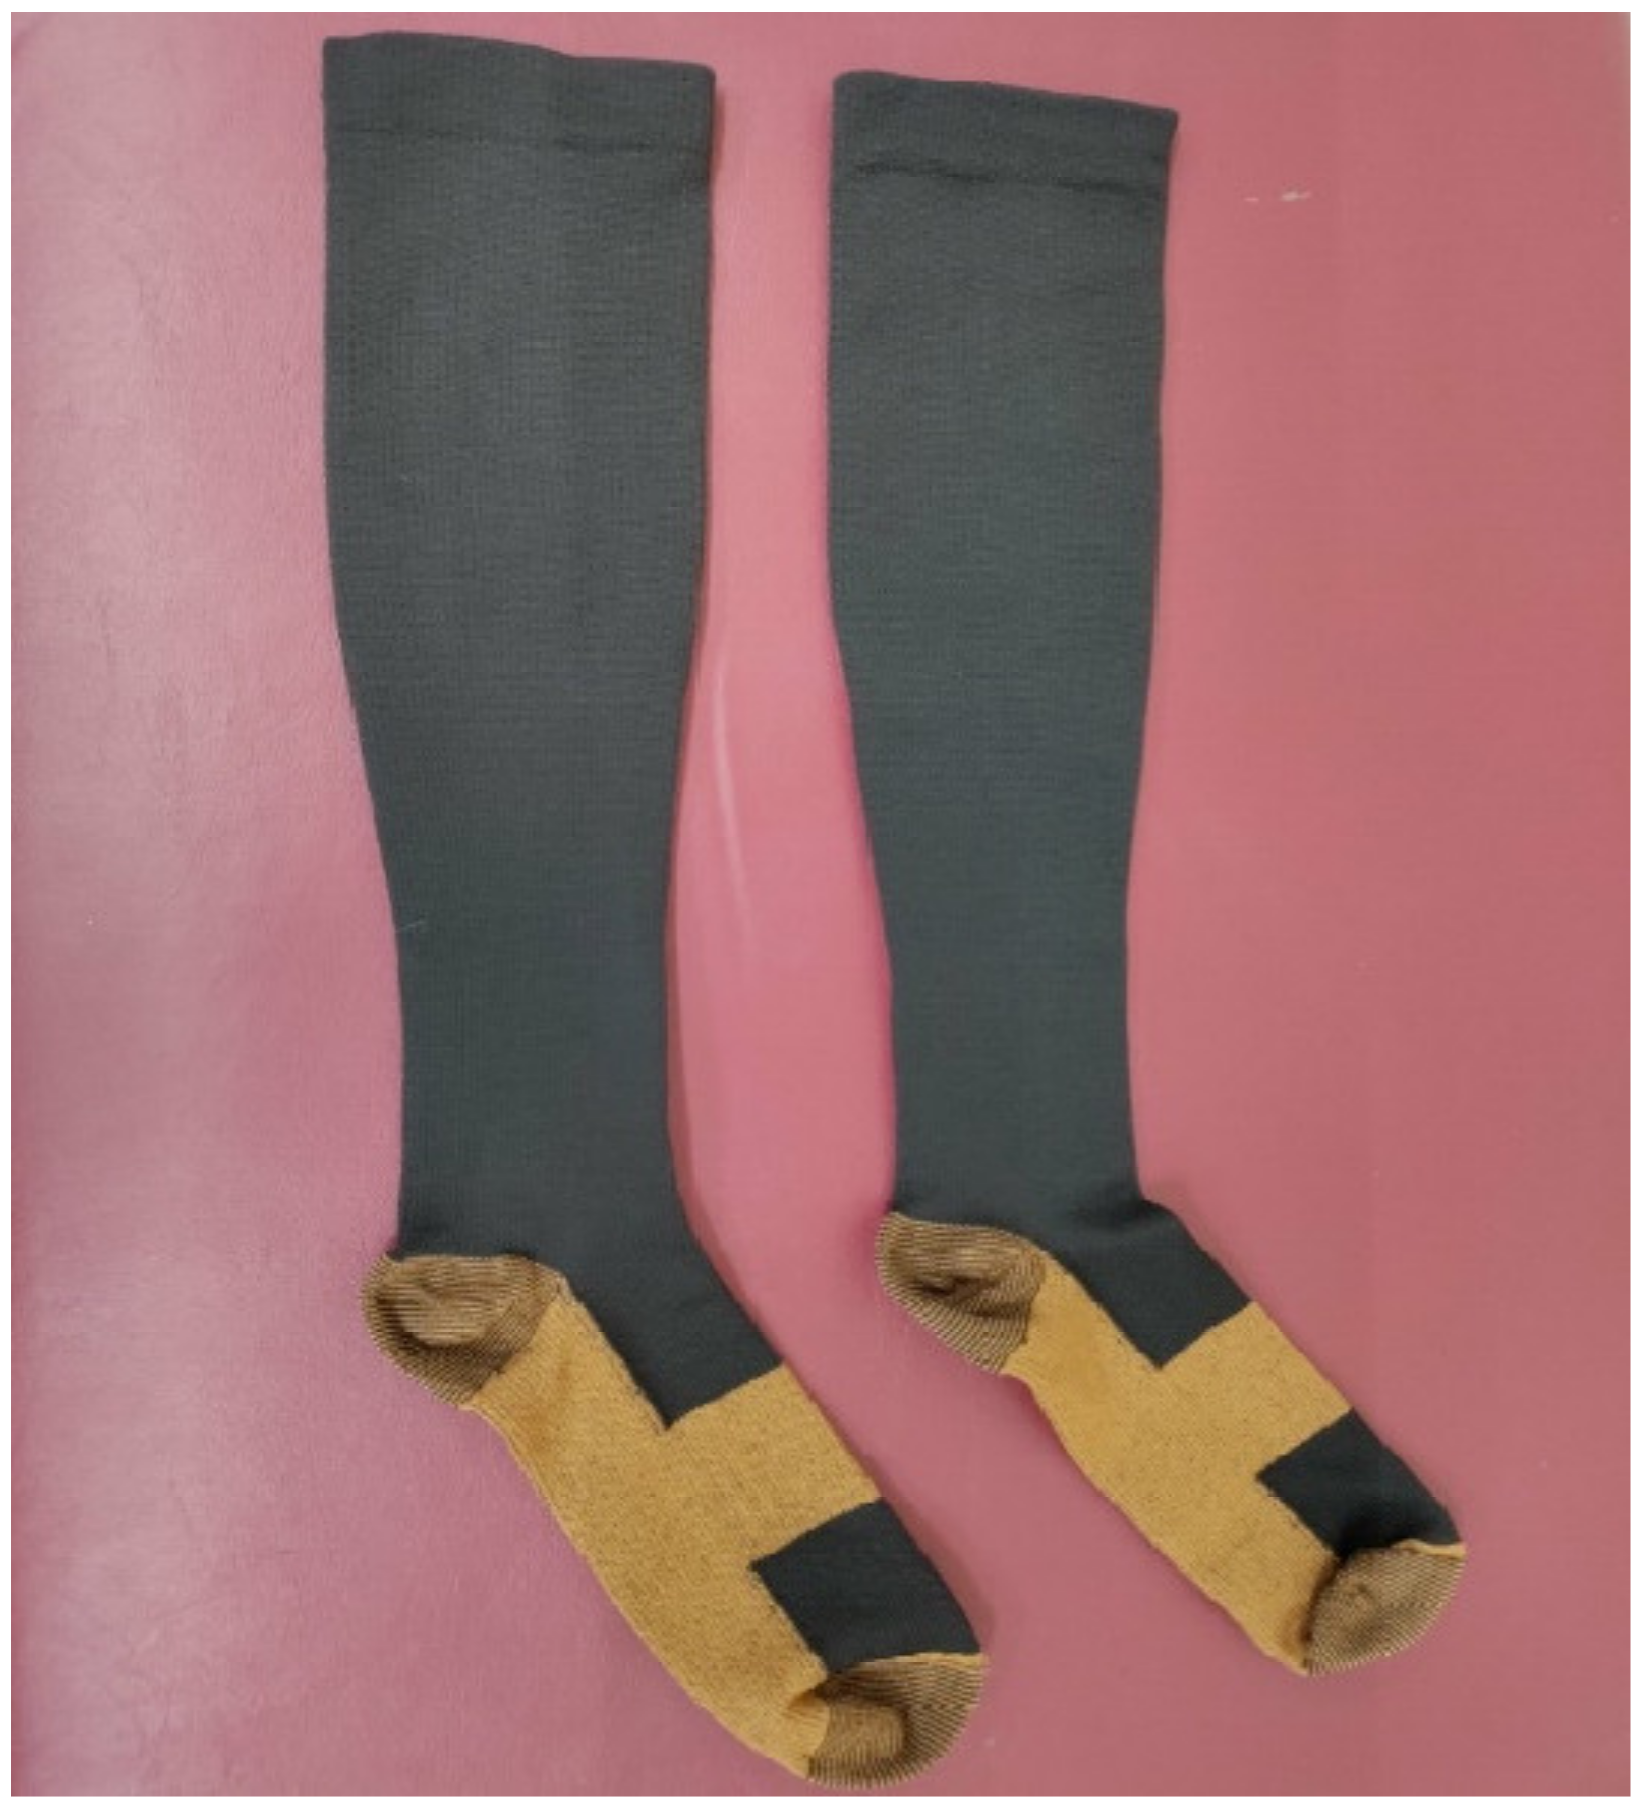 Textiles | Free Full-Text | Sensory and Tactile Comfort Assessment of  Sub-Clinical and Clinical Compression Socks on Individuals with Ankle  Instability | HTML